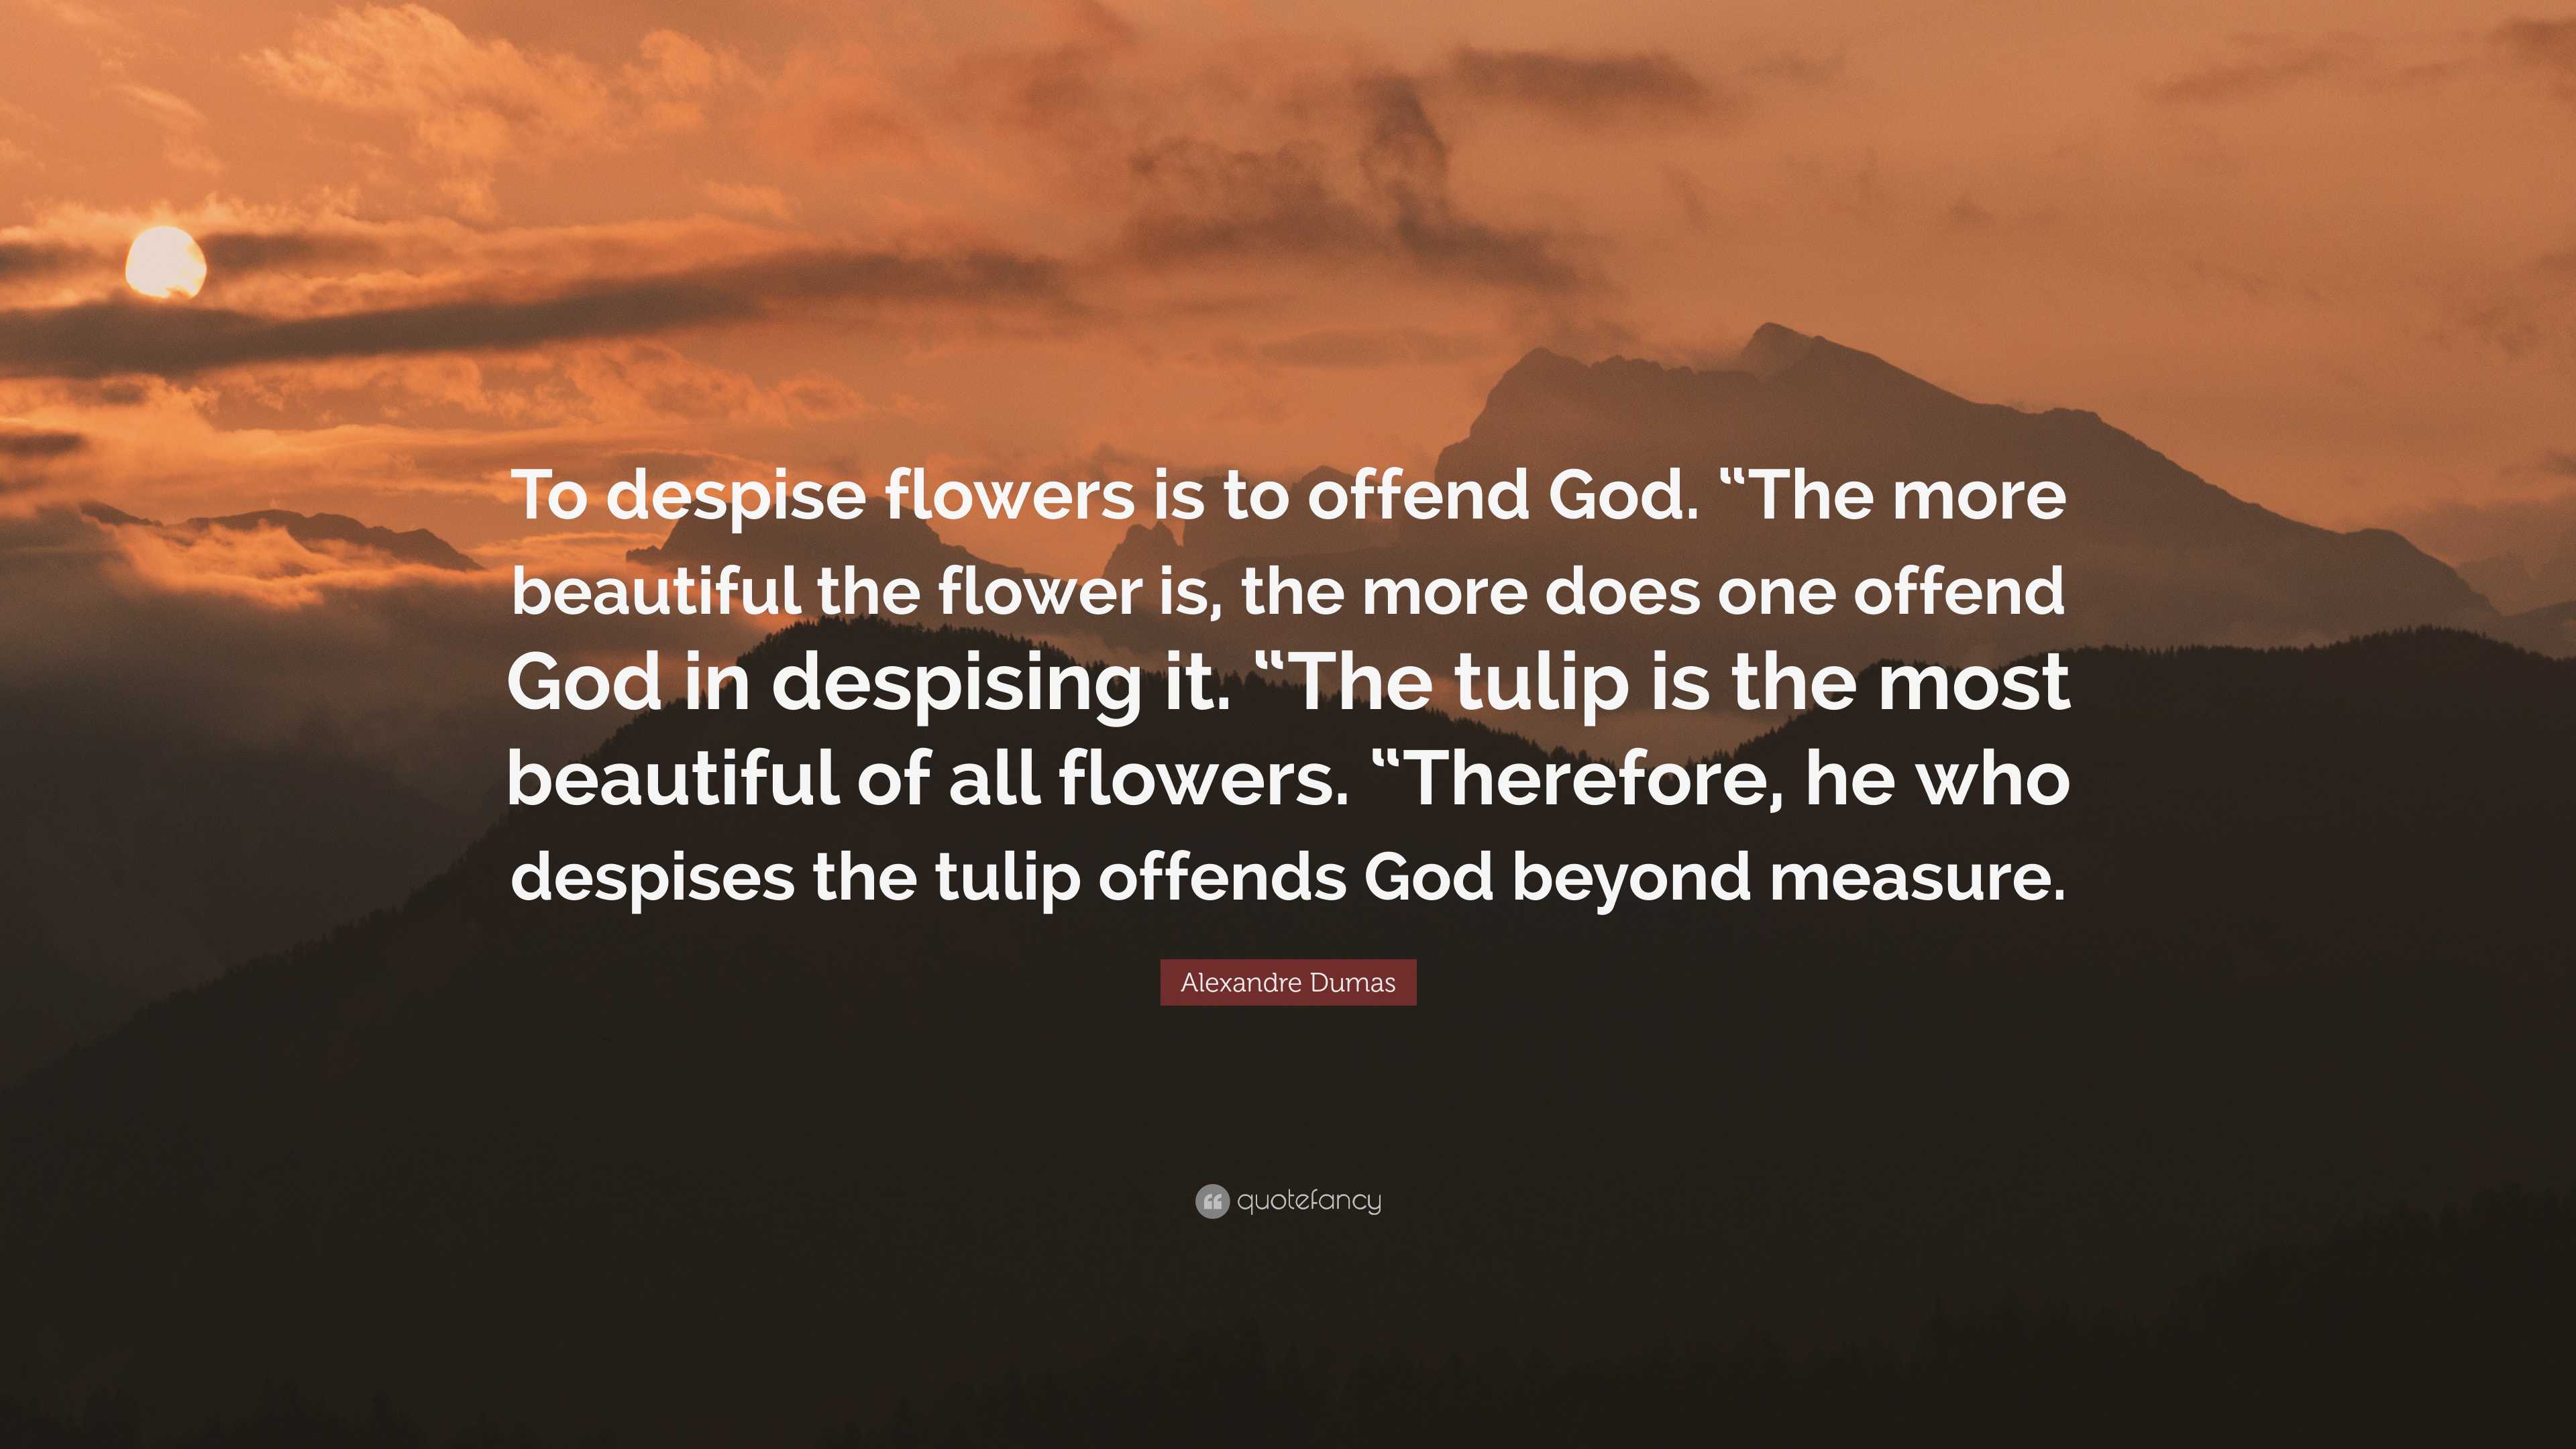 Alexandre Dumas Quote: “To despise flowers is to offend God. “The more ...